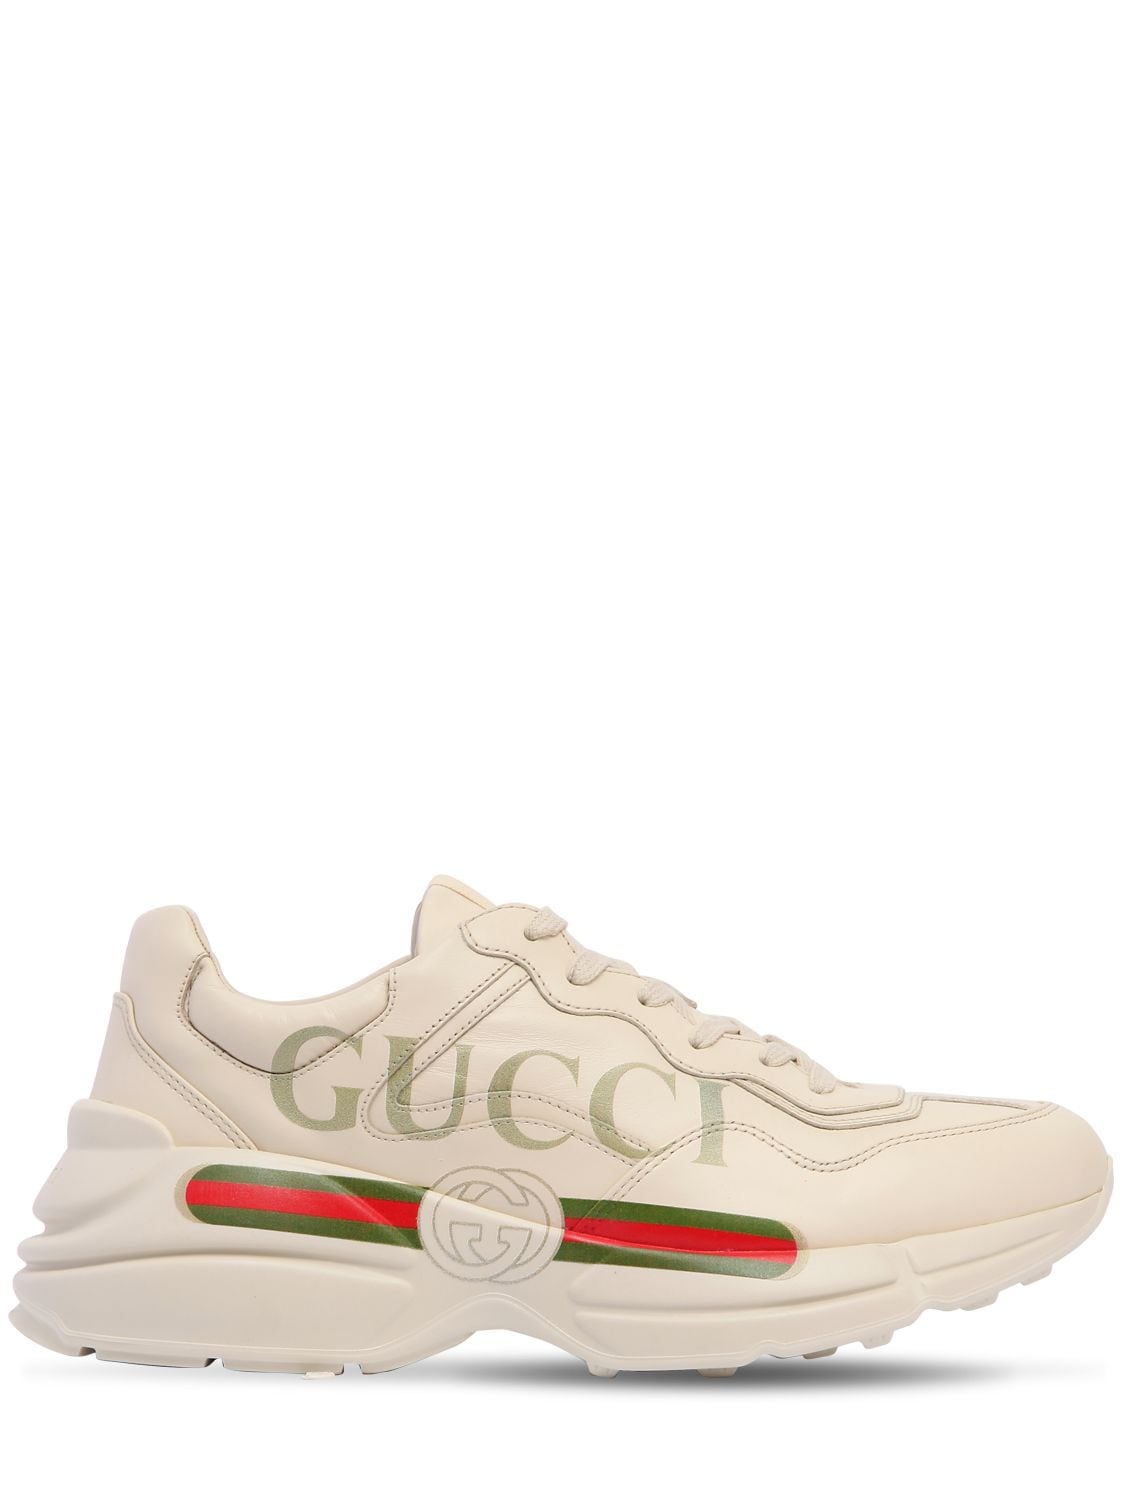 Rhyton Gucci Print Leather Sneakers